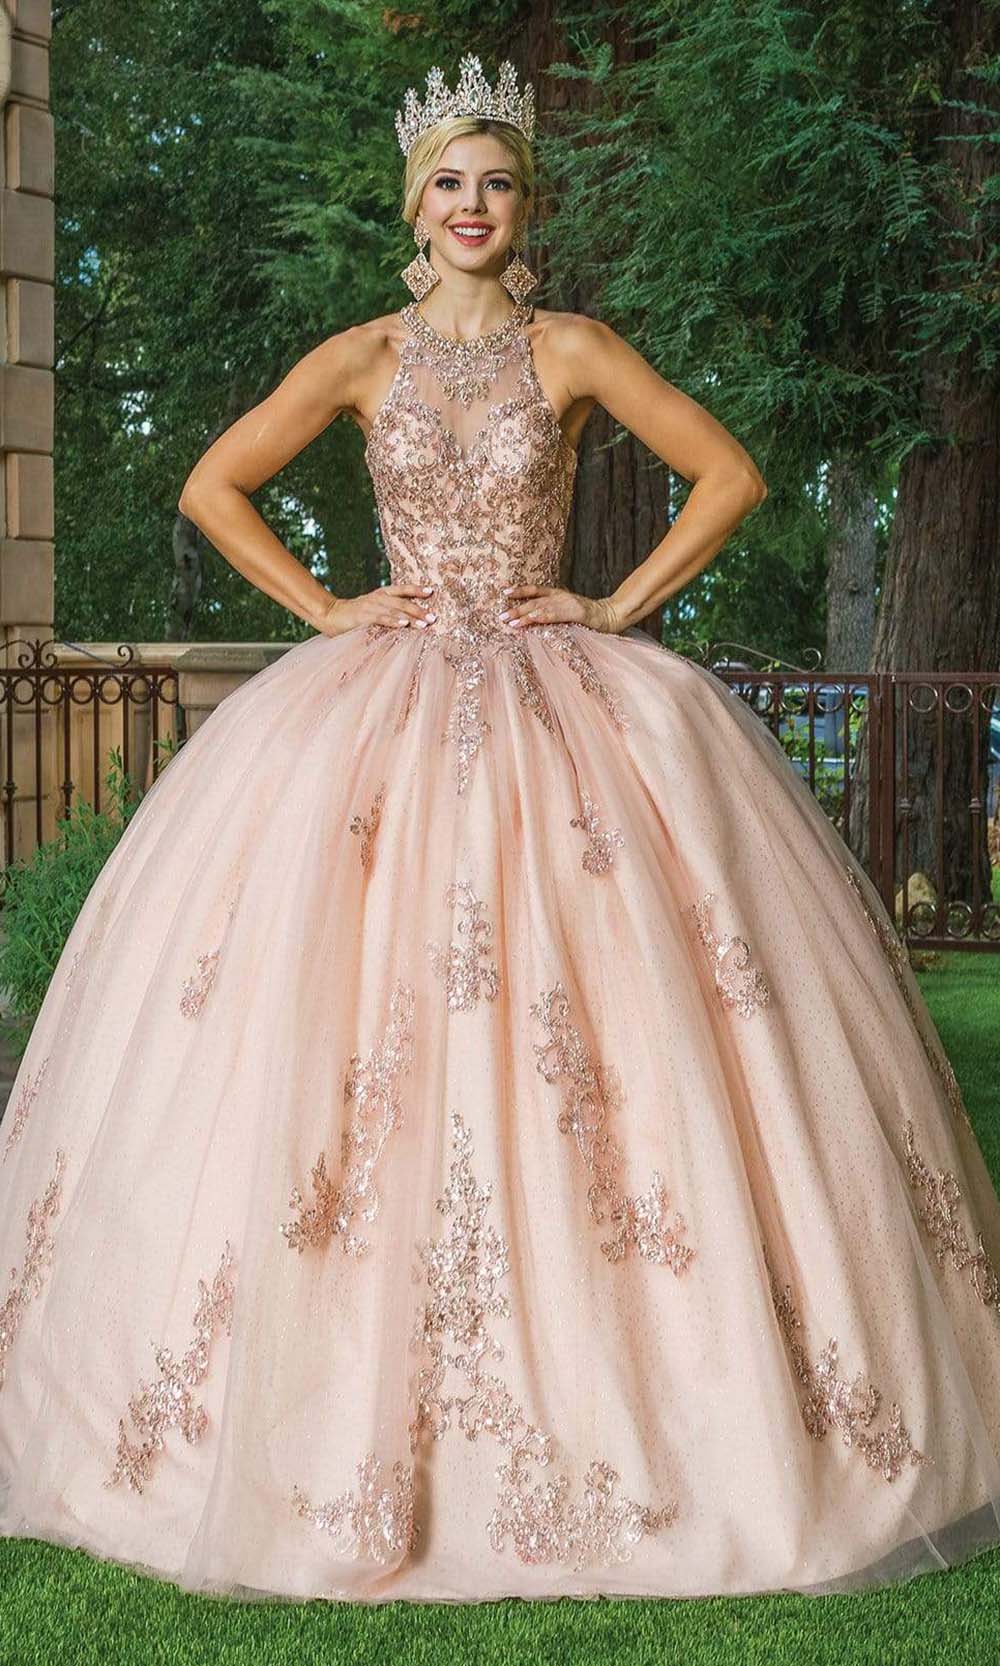 Dancing Queen - 1628 Halter Neck Embellished Ballgown Special Occasion Dress XS / Rose Gold